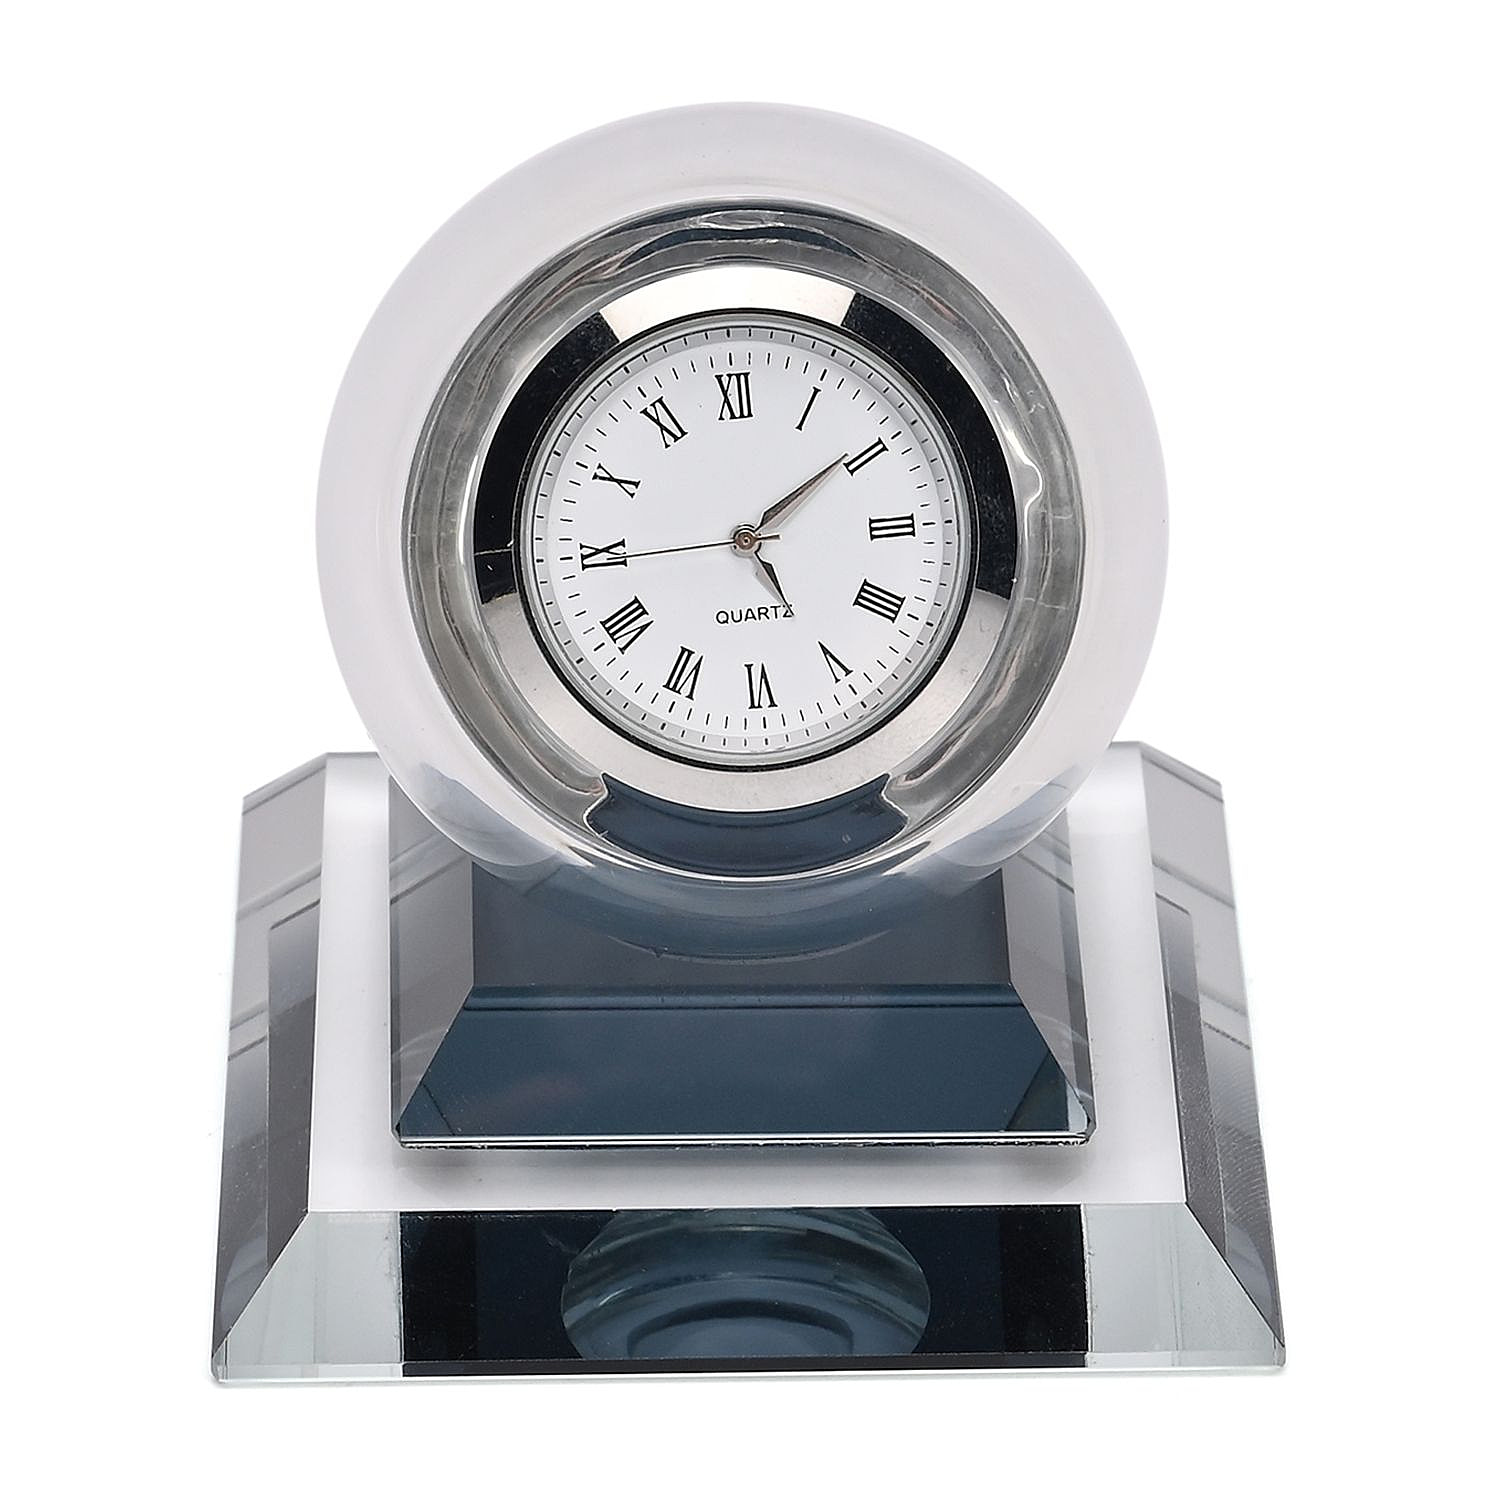 Spherical Glass Table Clock with Roman Numrals - Black